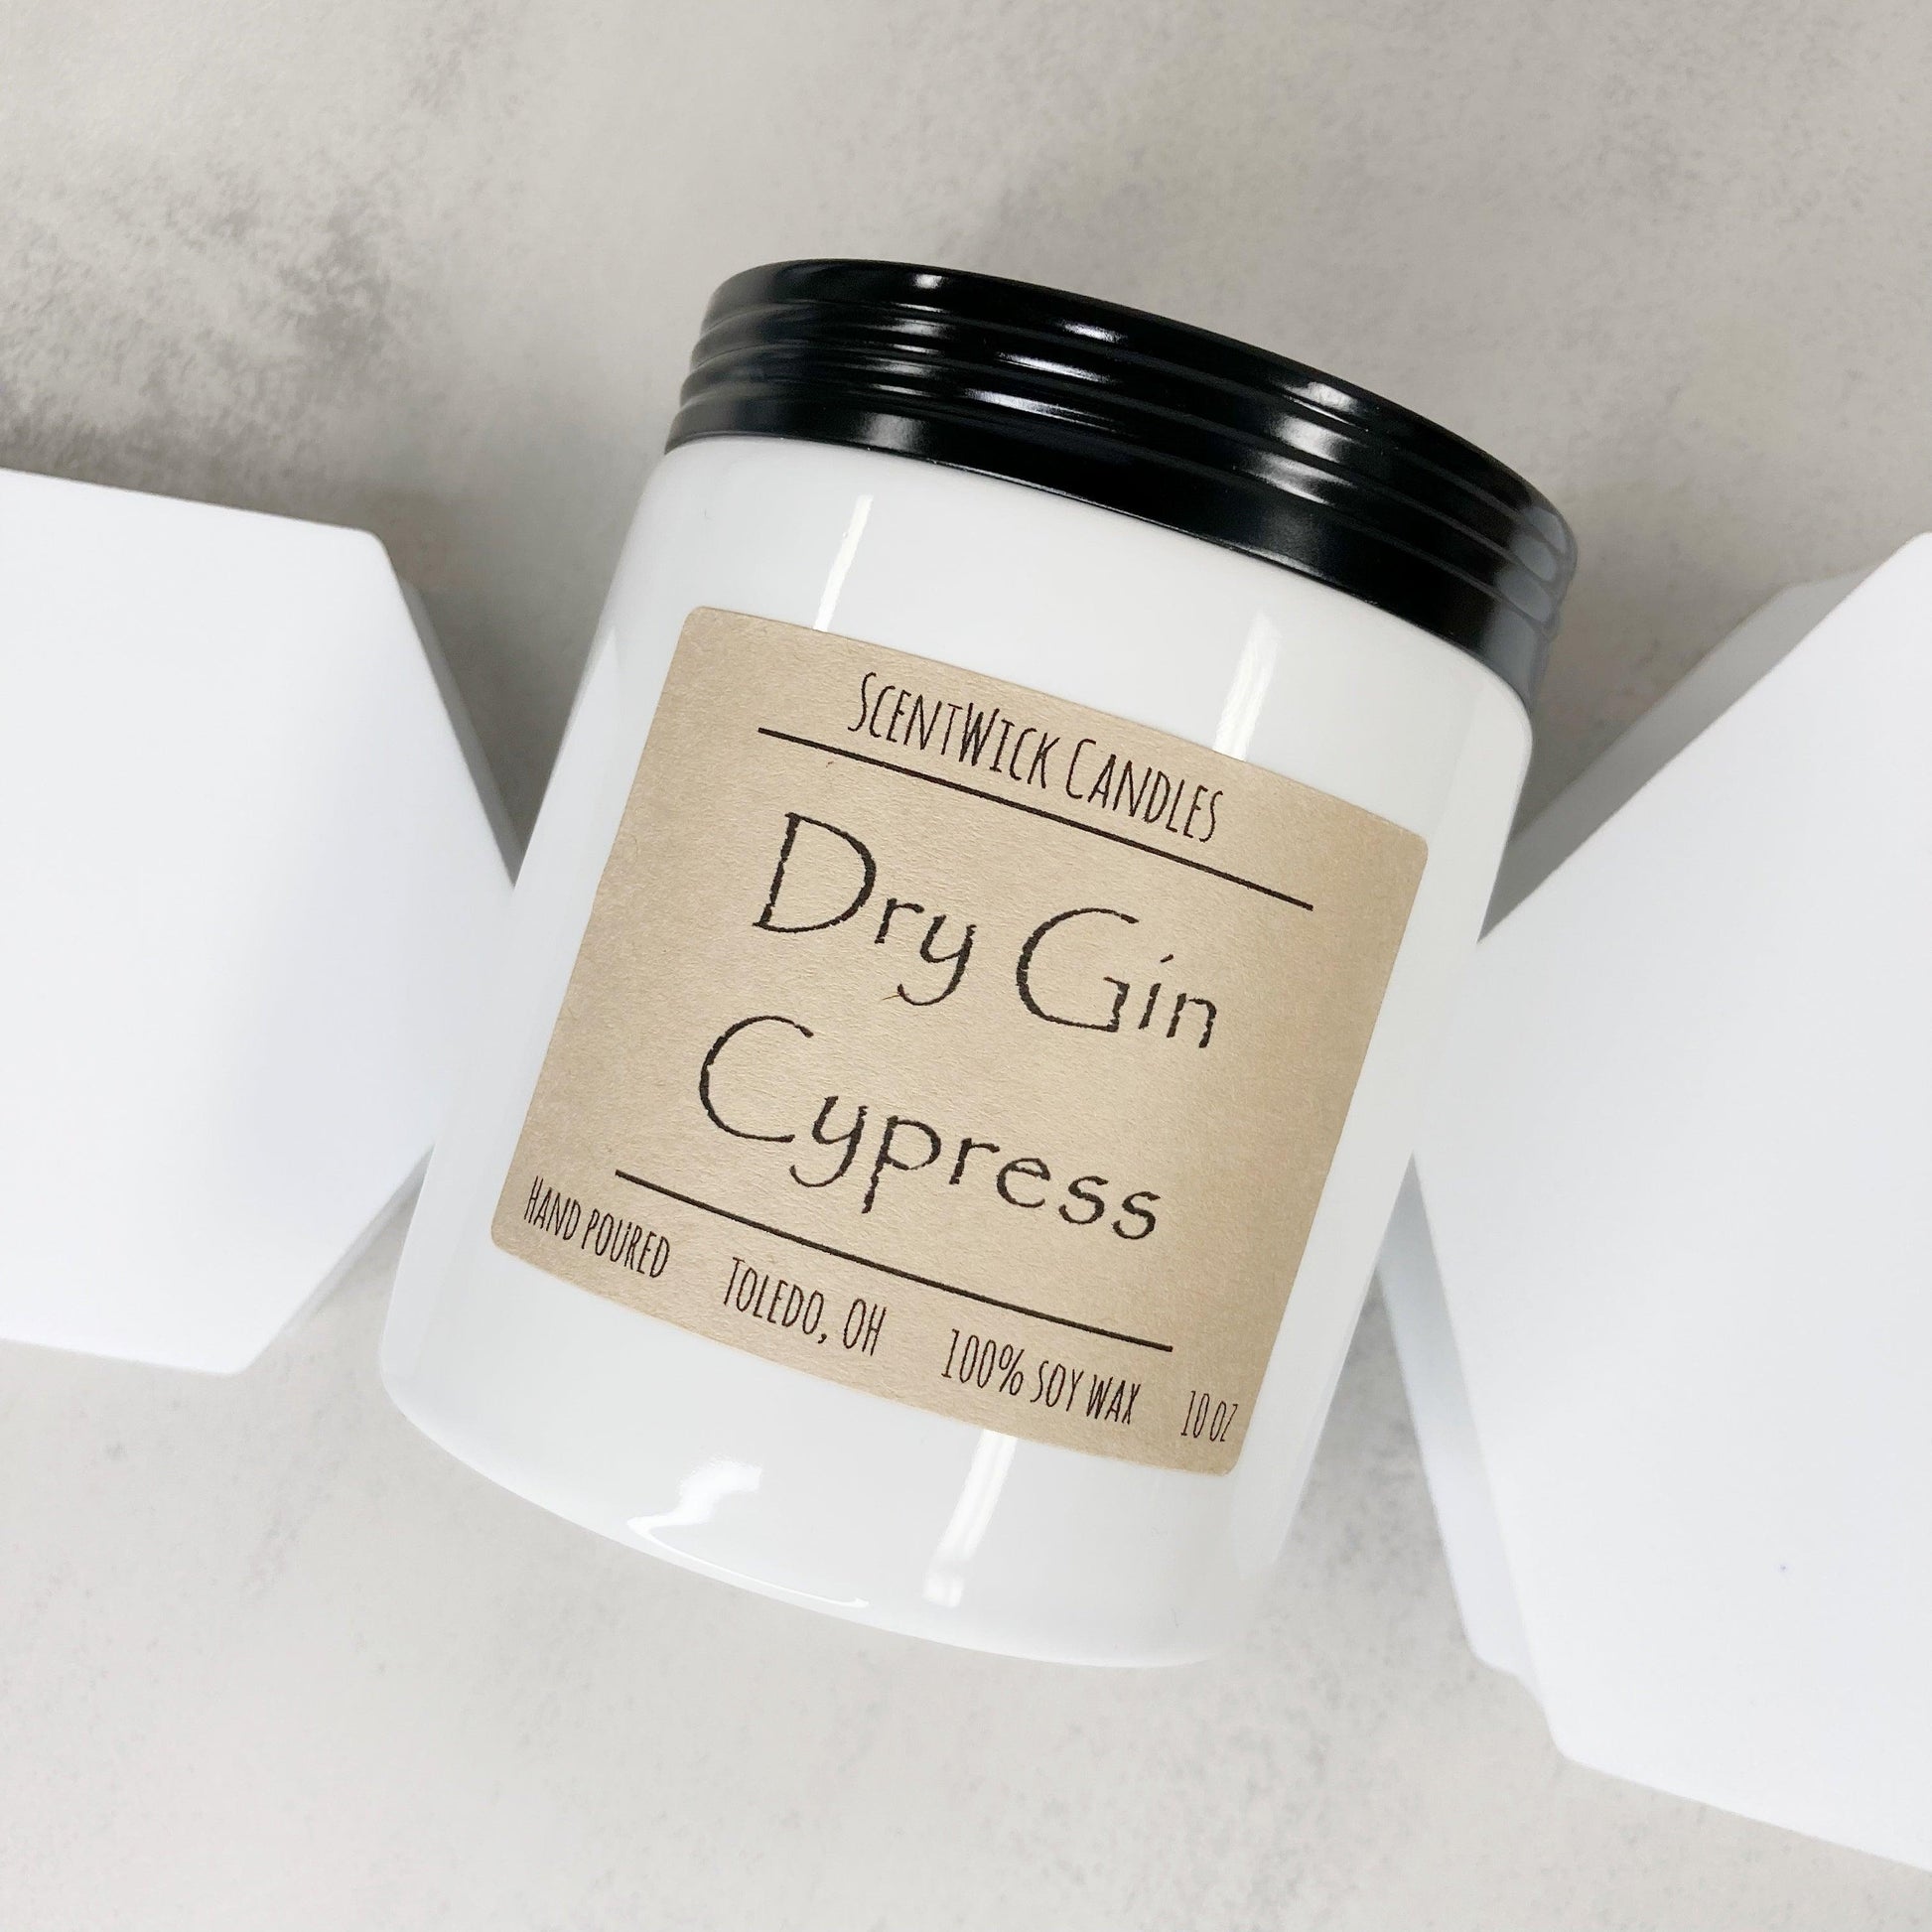 The Farmhouse Collection - Dry Gin Cypress - ScentWick Candles